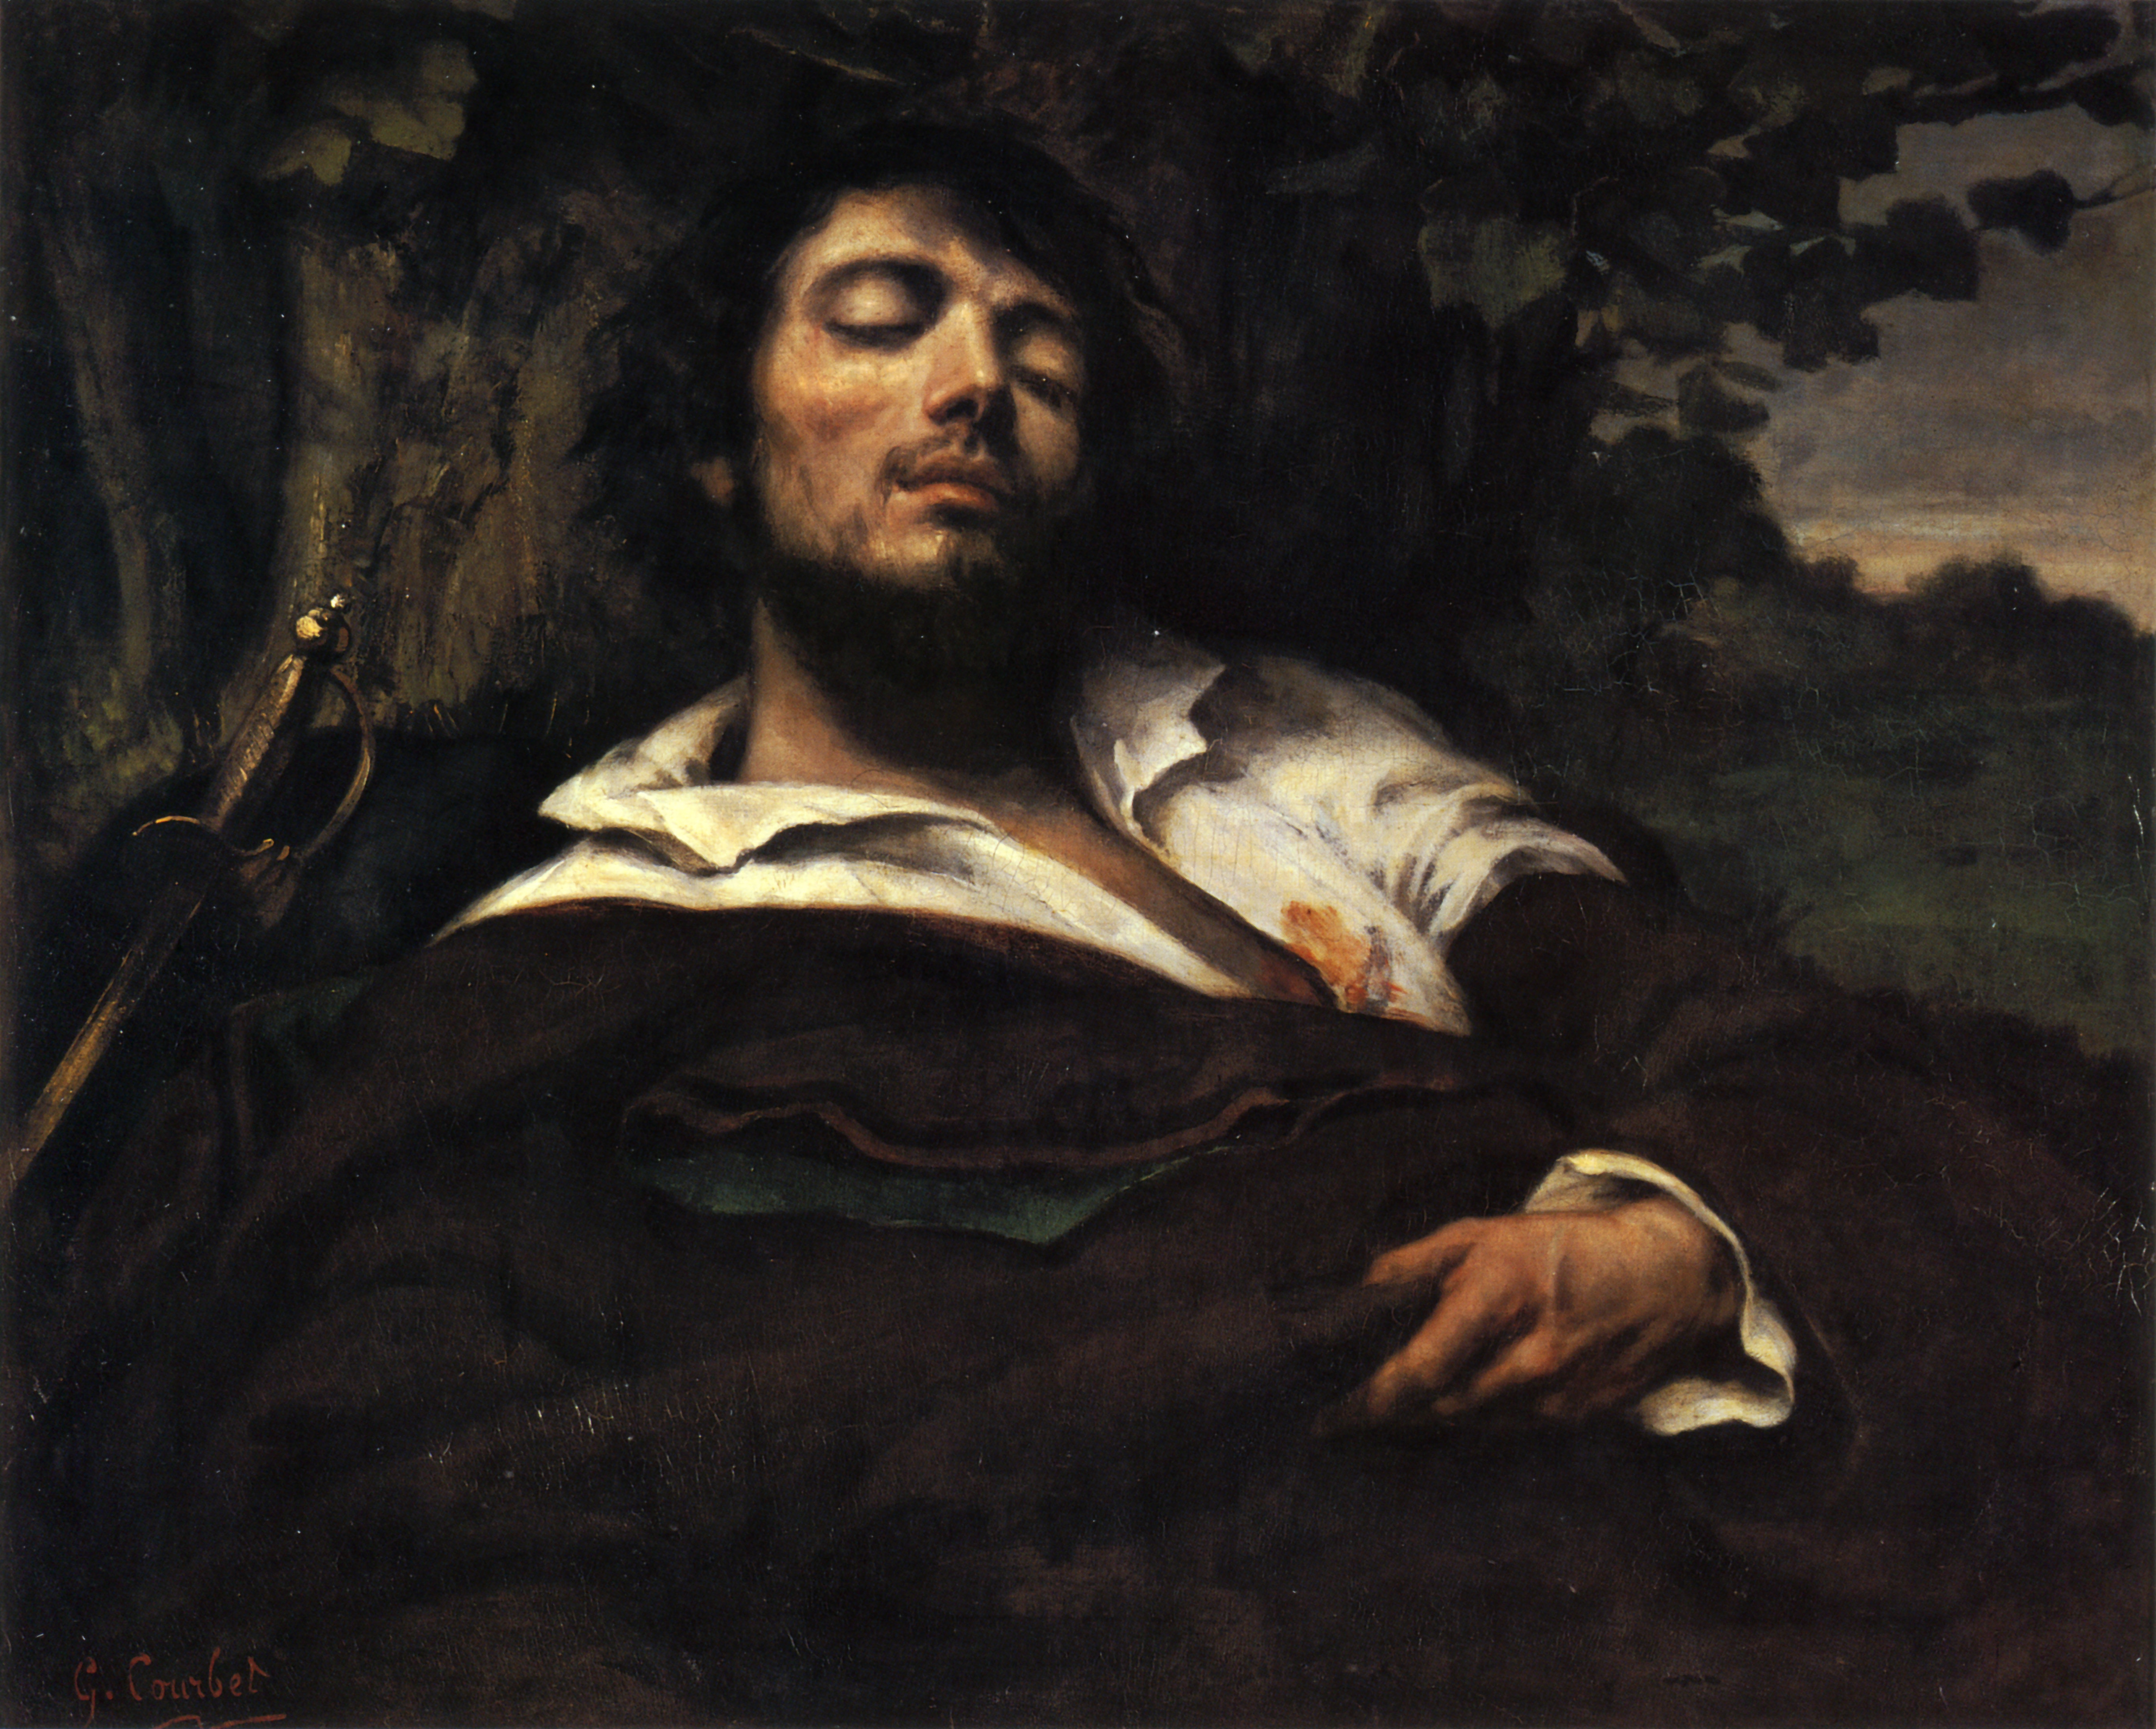 Portrait of the Artist called The Wounded Man by Gustave Courbet - between 1844 - 1855 - 81.5 × 97.5 cm Musée d'Orsay